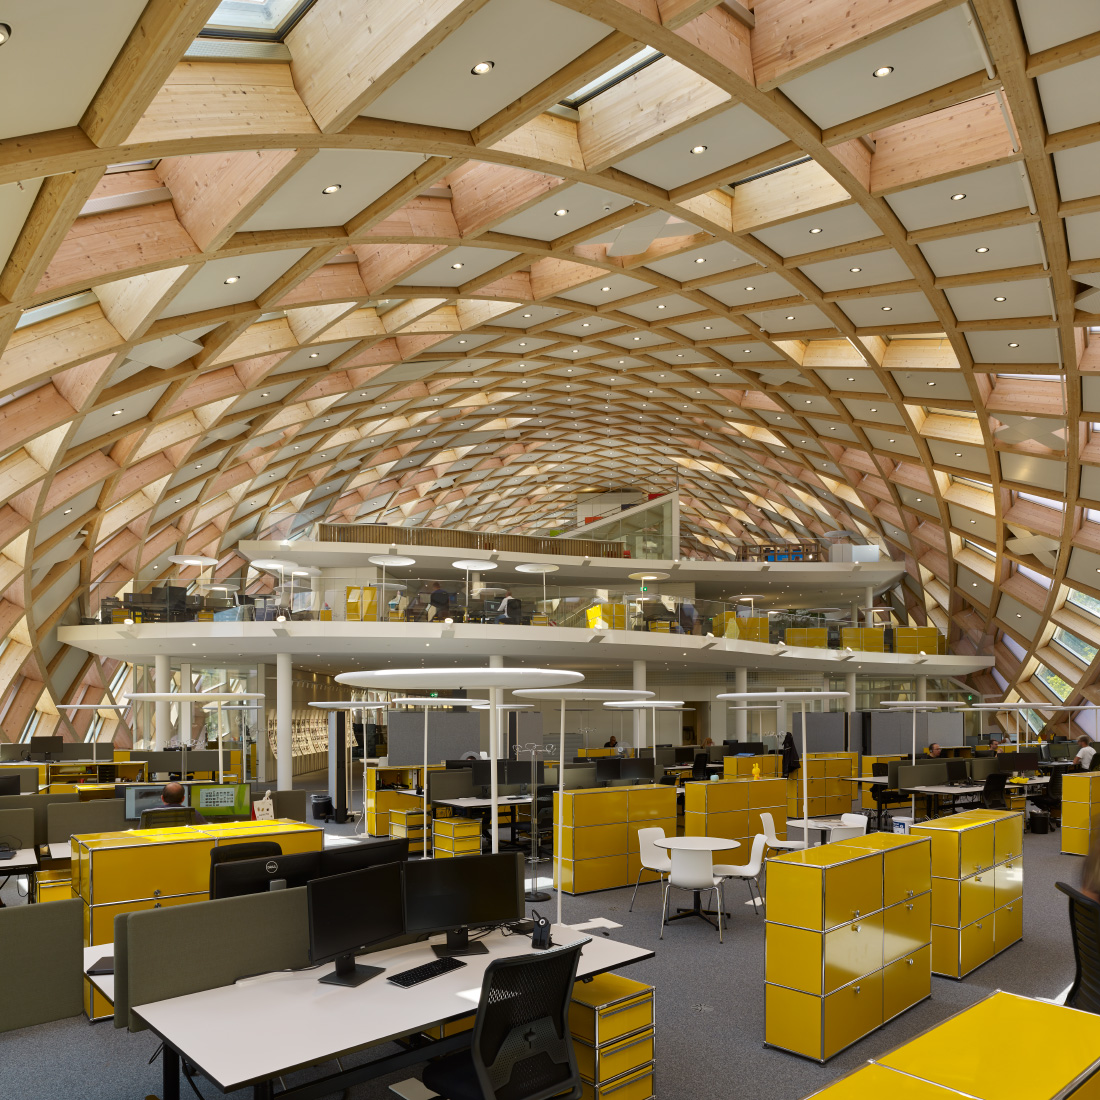 Interior of the Swatch office, with a timber coffered ceiling